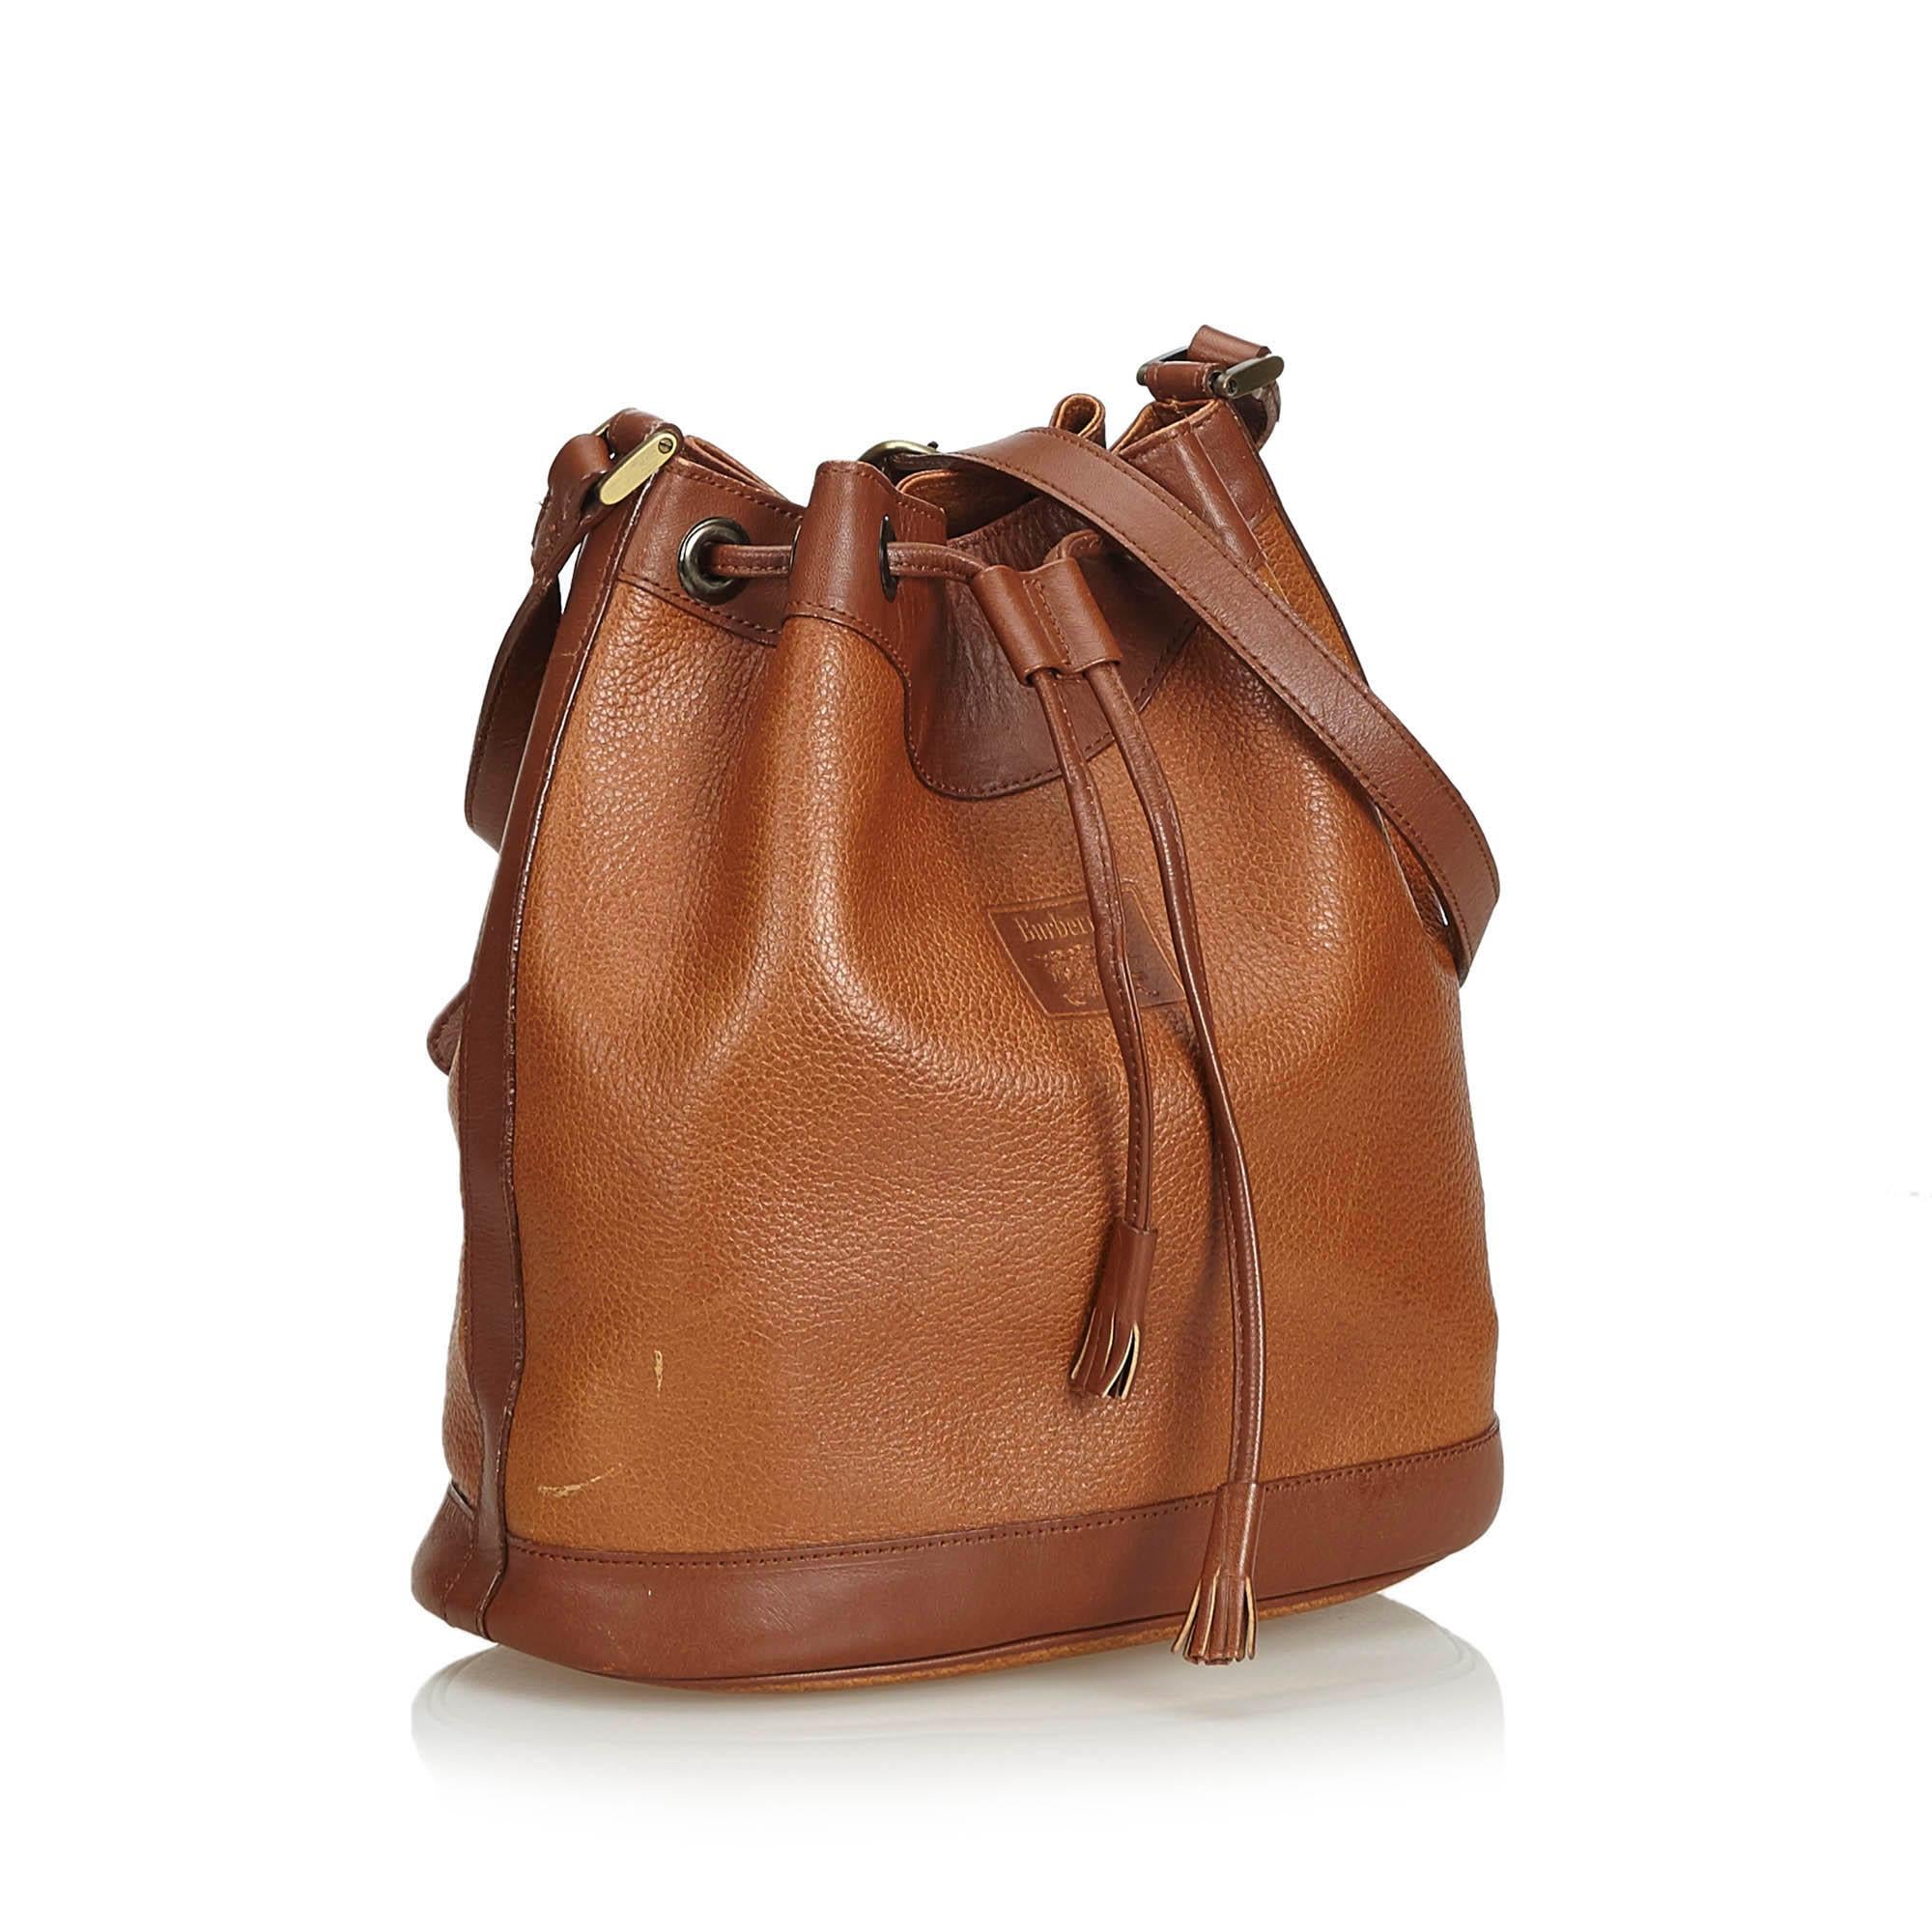 This bucket bag features a leather body, a flat leather strap, a drawstring closure, and interior zip and slip pockets. It carries as B+ condition rating.

Inclusions: 
This item does not come with inclusions.

Dimensions:
Length: 26.00 cm
Width: